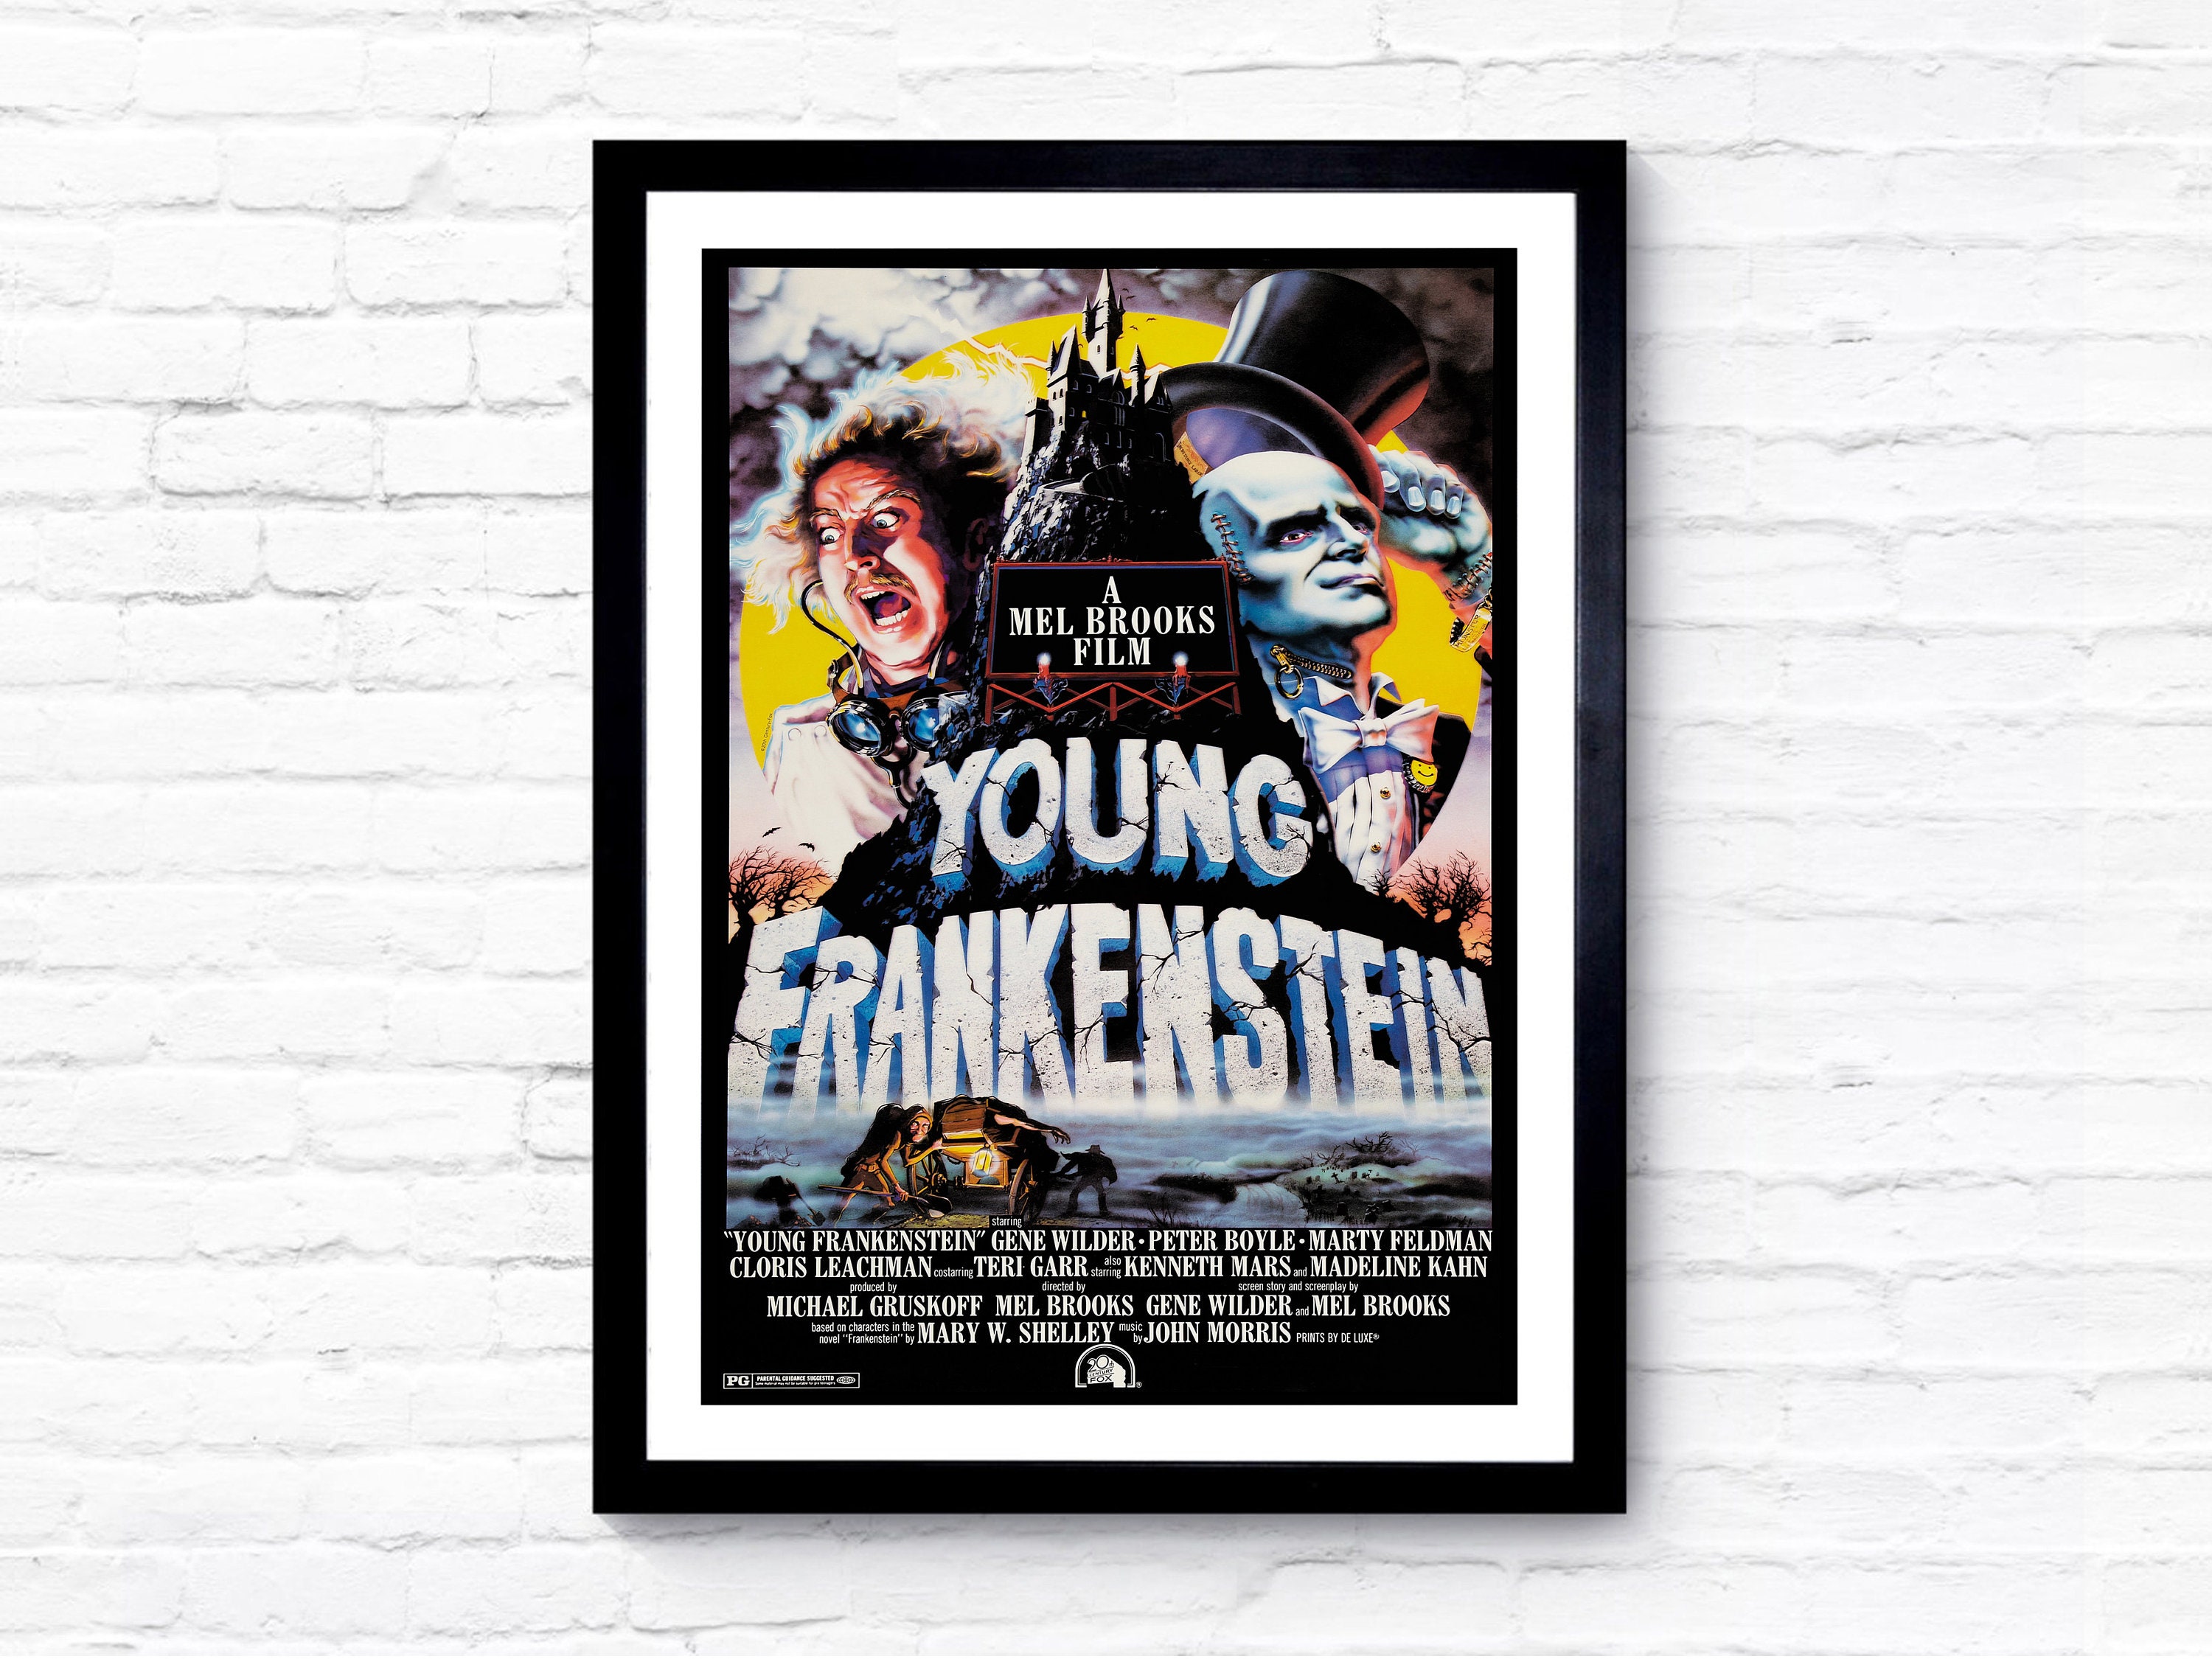 Movie Poster  Film Poster 1974 A4 A2 A5 Prints A3 A1 Young Frankenstein